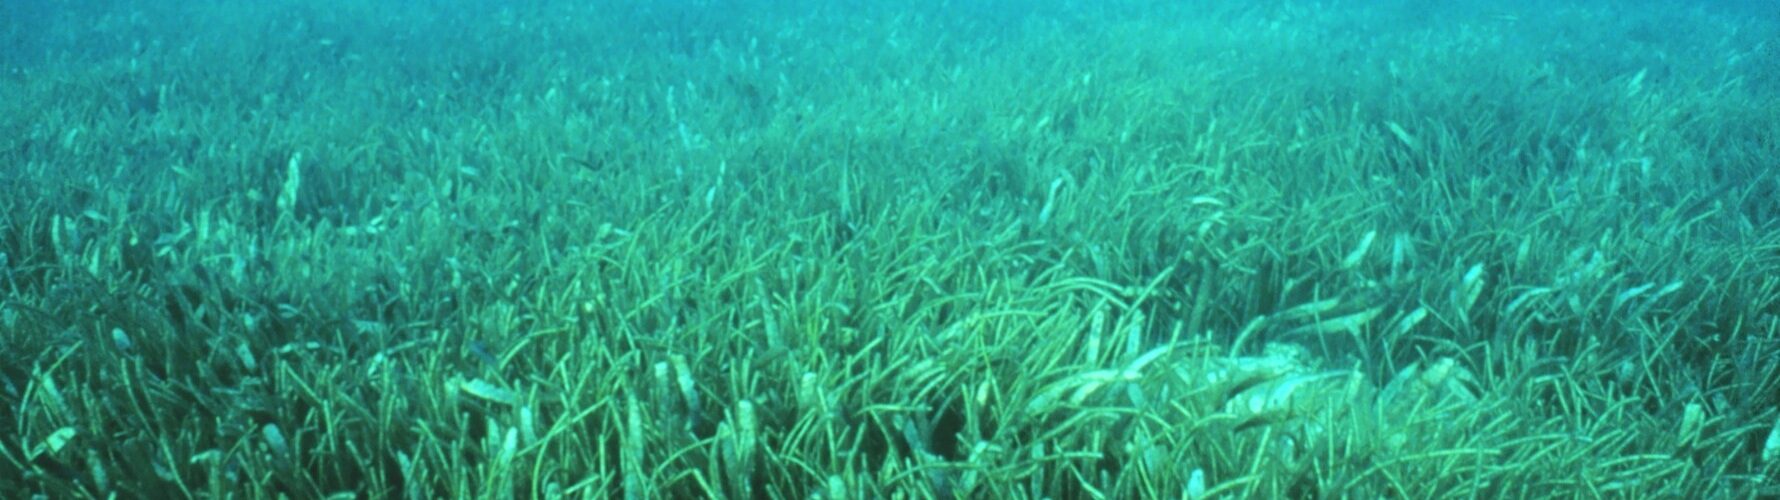 Figure 10. Seagrass. Sourced from NOAA Photo Library, Heather Dine (2010).